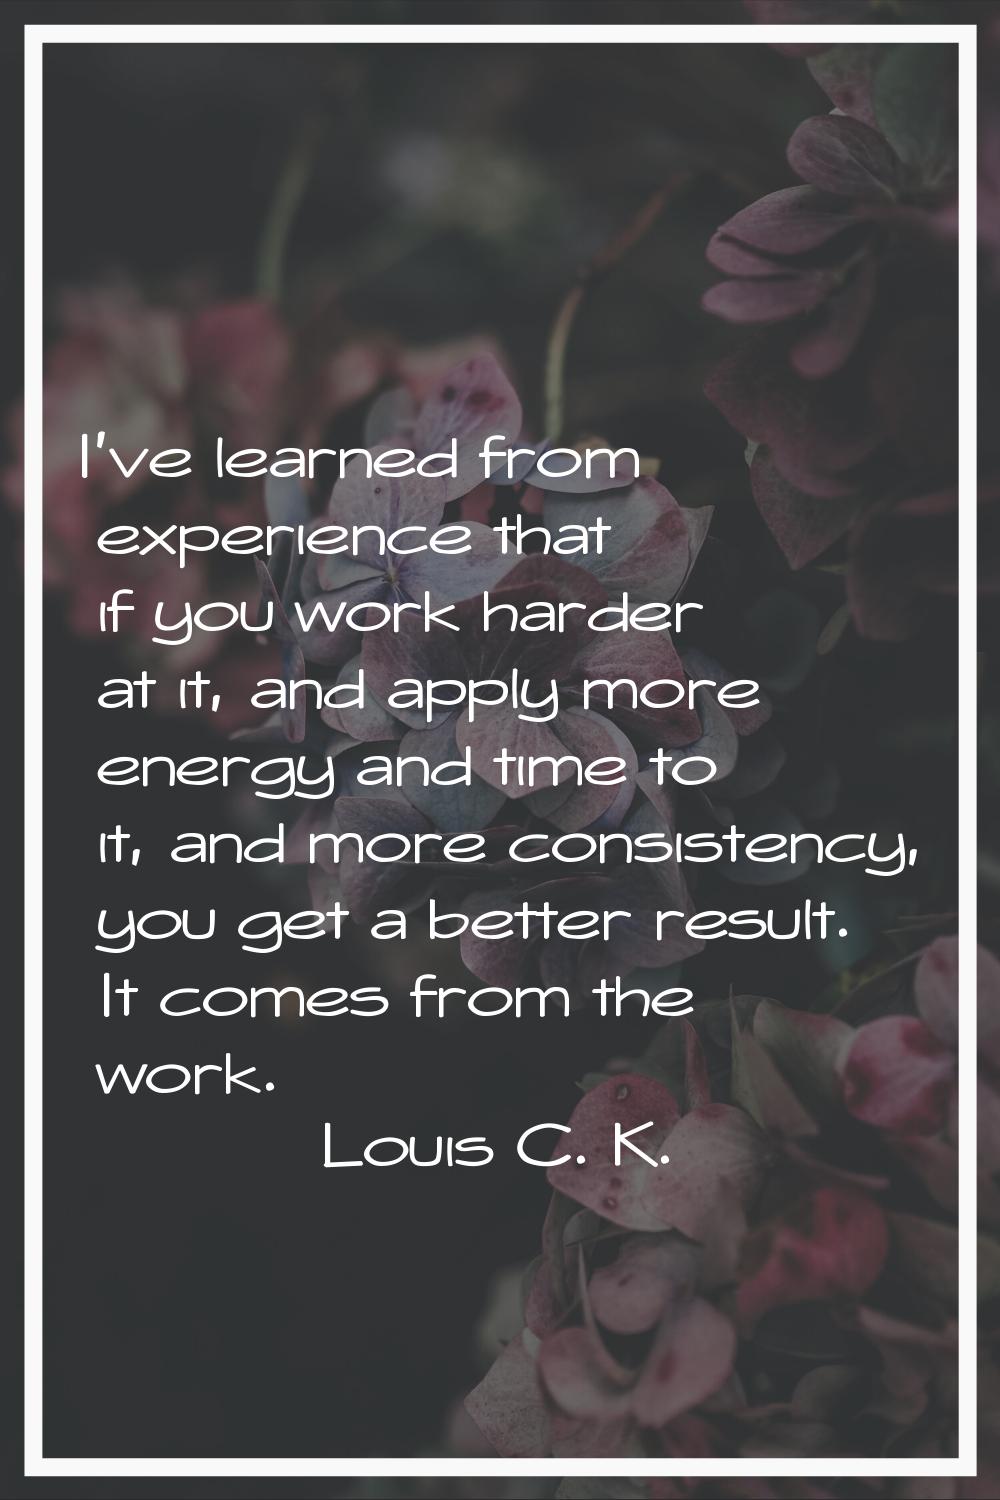 I've learned from experience that if you work harder at it, and apply more energy and time to it, a